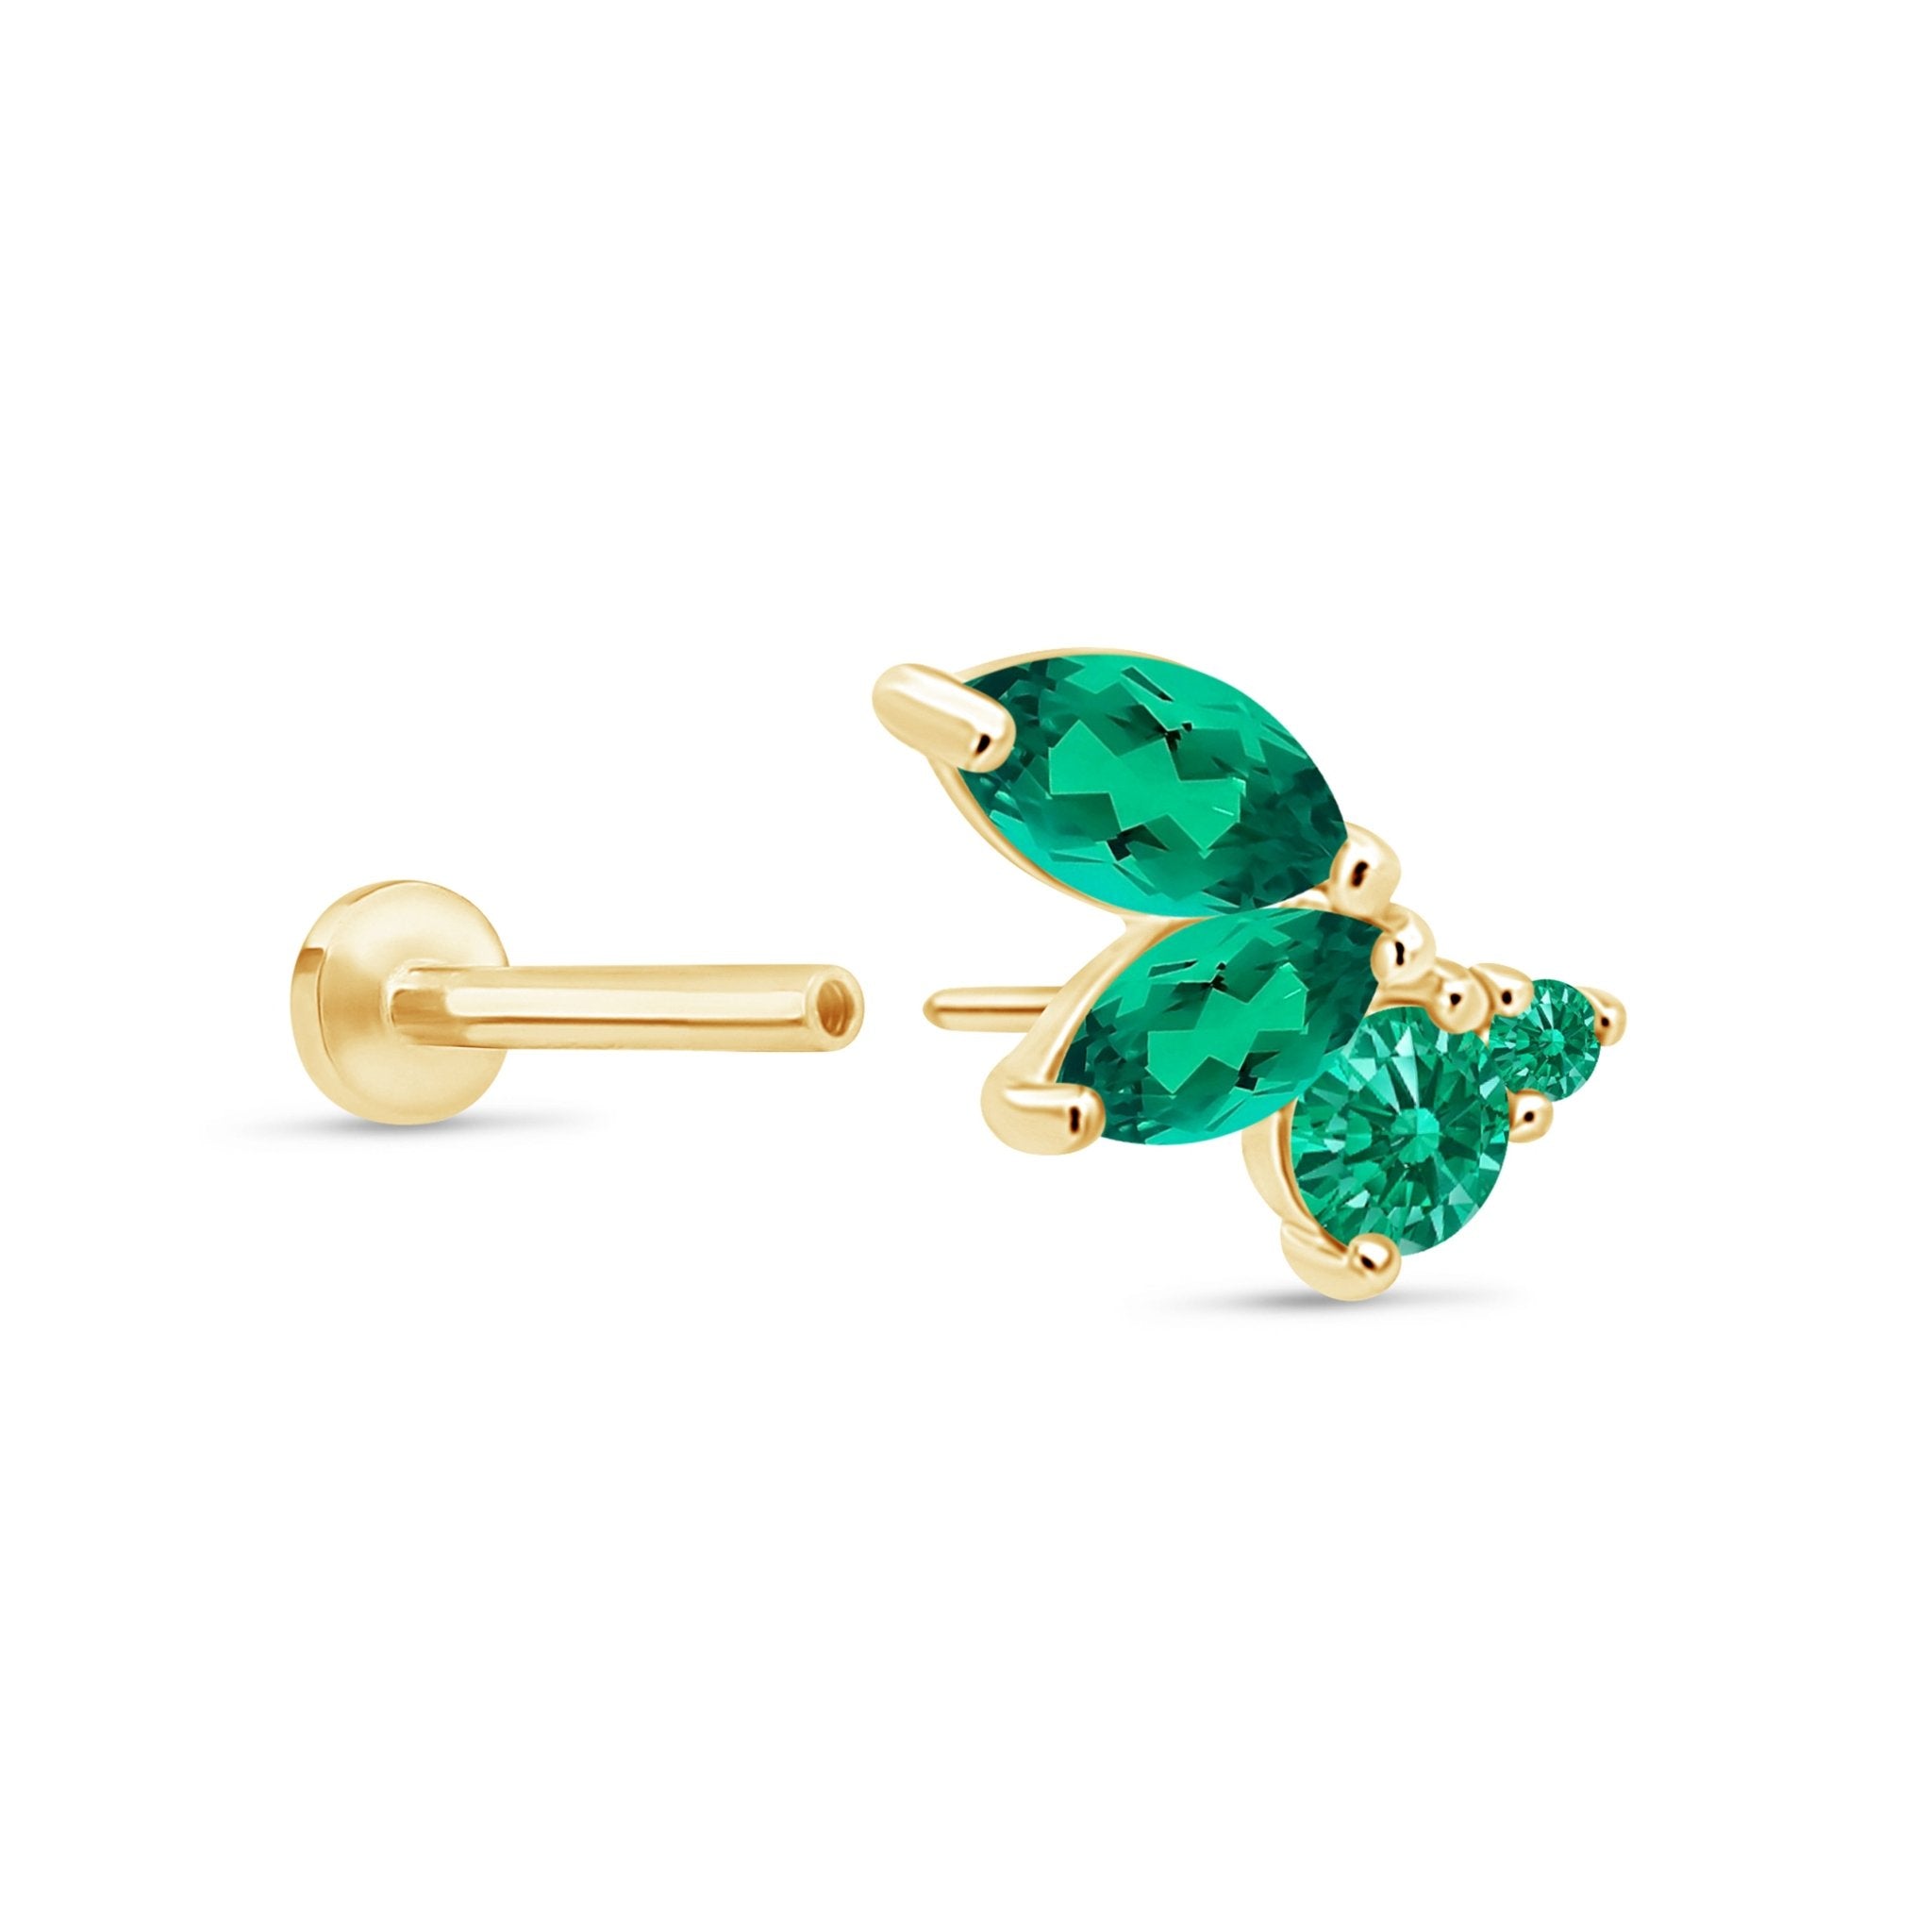 Green Emerald Marquise Wing Flat Back Earring Earrings Estella Collection #product_description# 18576 test test mechanic #tag4# #tag5# #tag6# #tag7# #tag8# #tag9# #tag10#